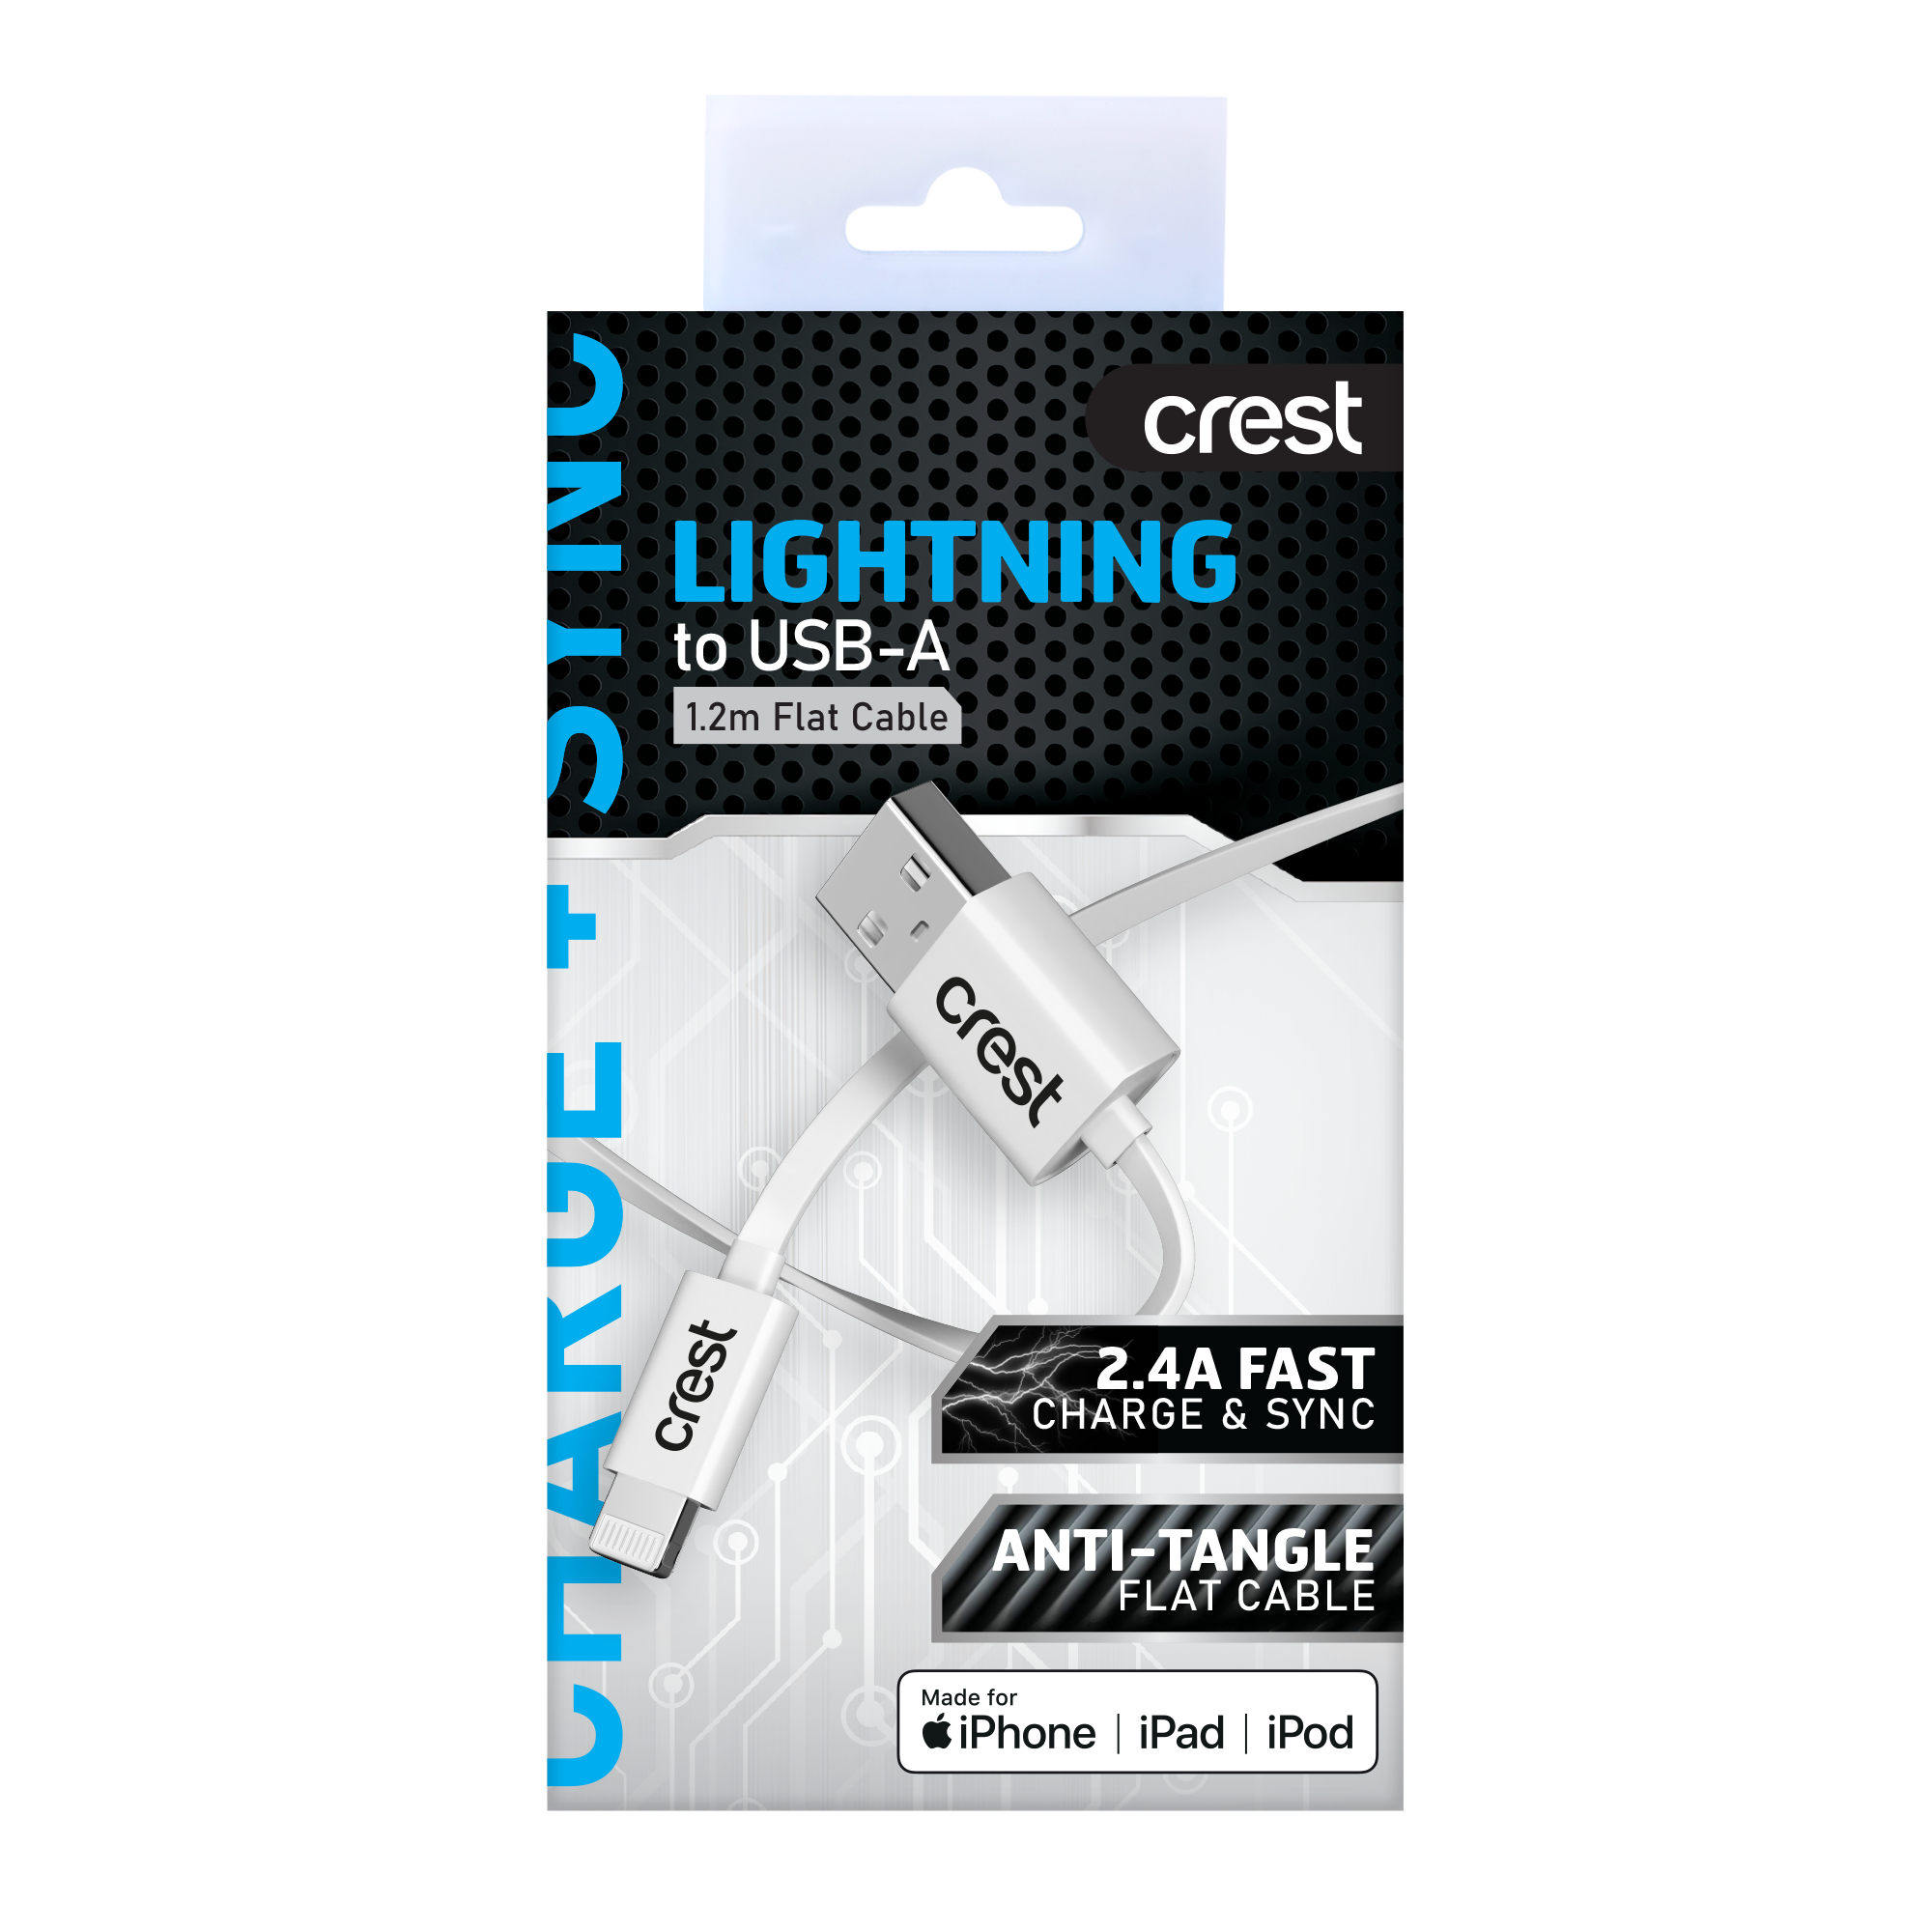 Lightning to USB-A Flat Cable 1.2M - White